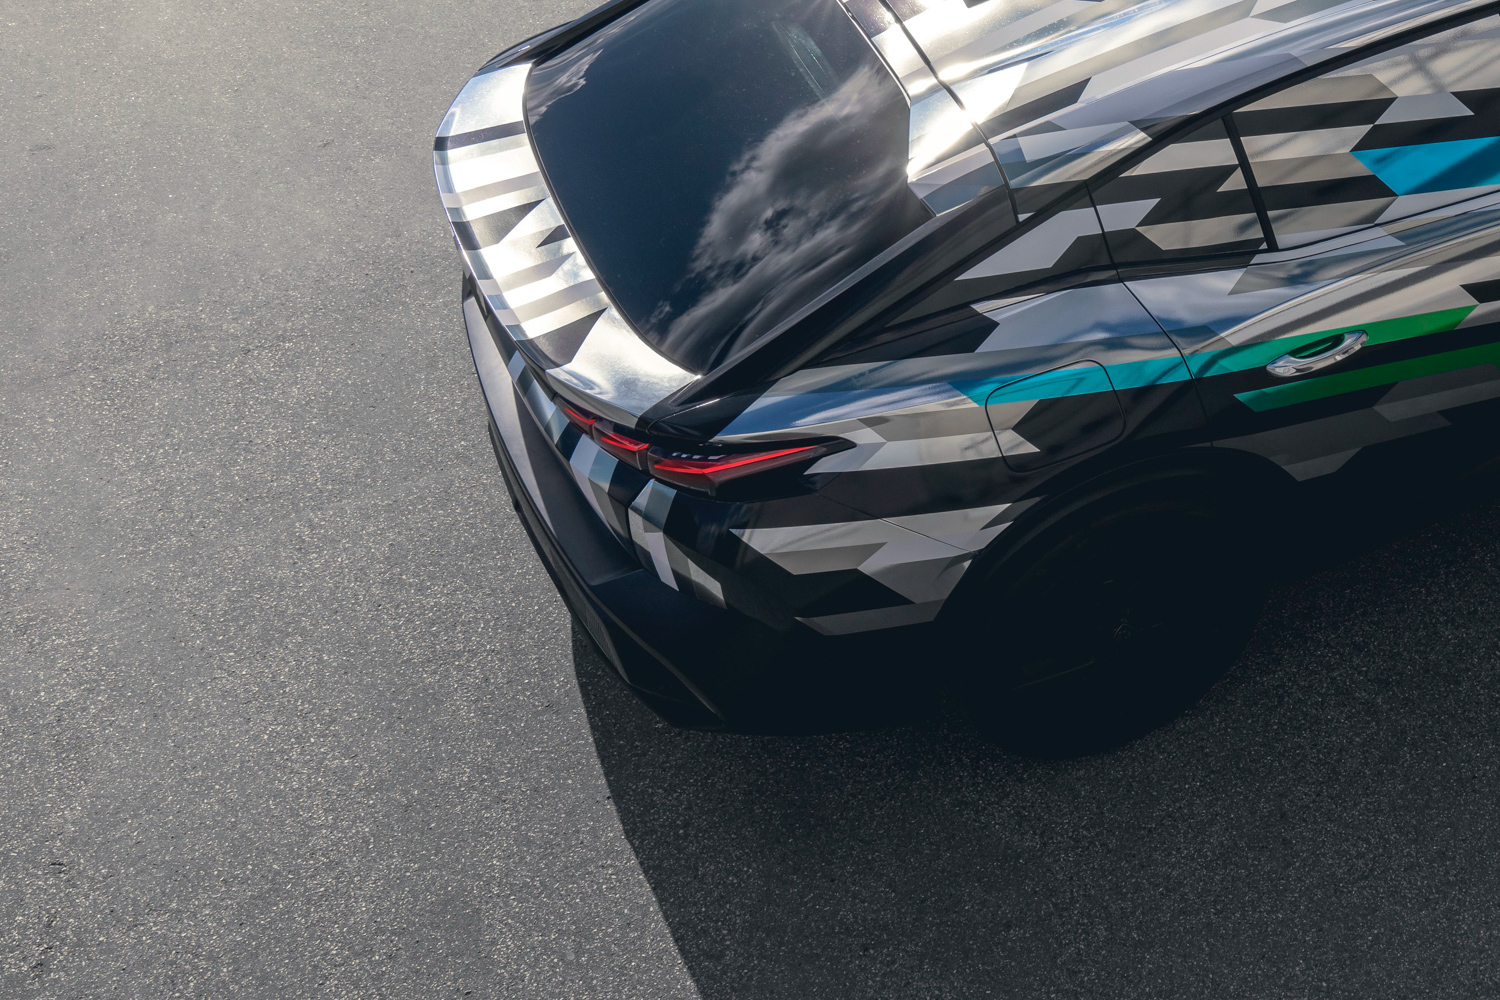 Car News | Peugeot teases styling of new 408